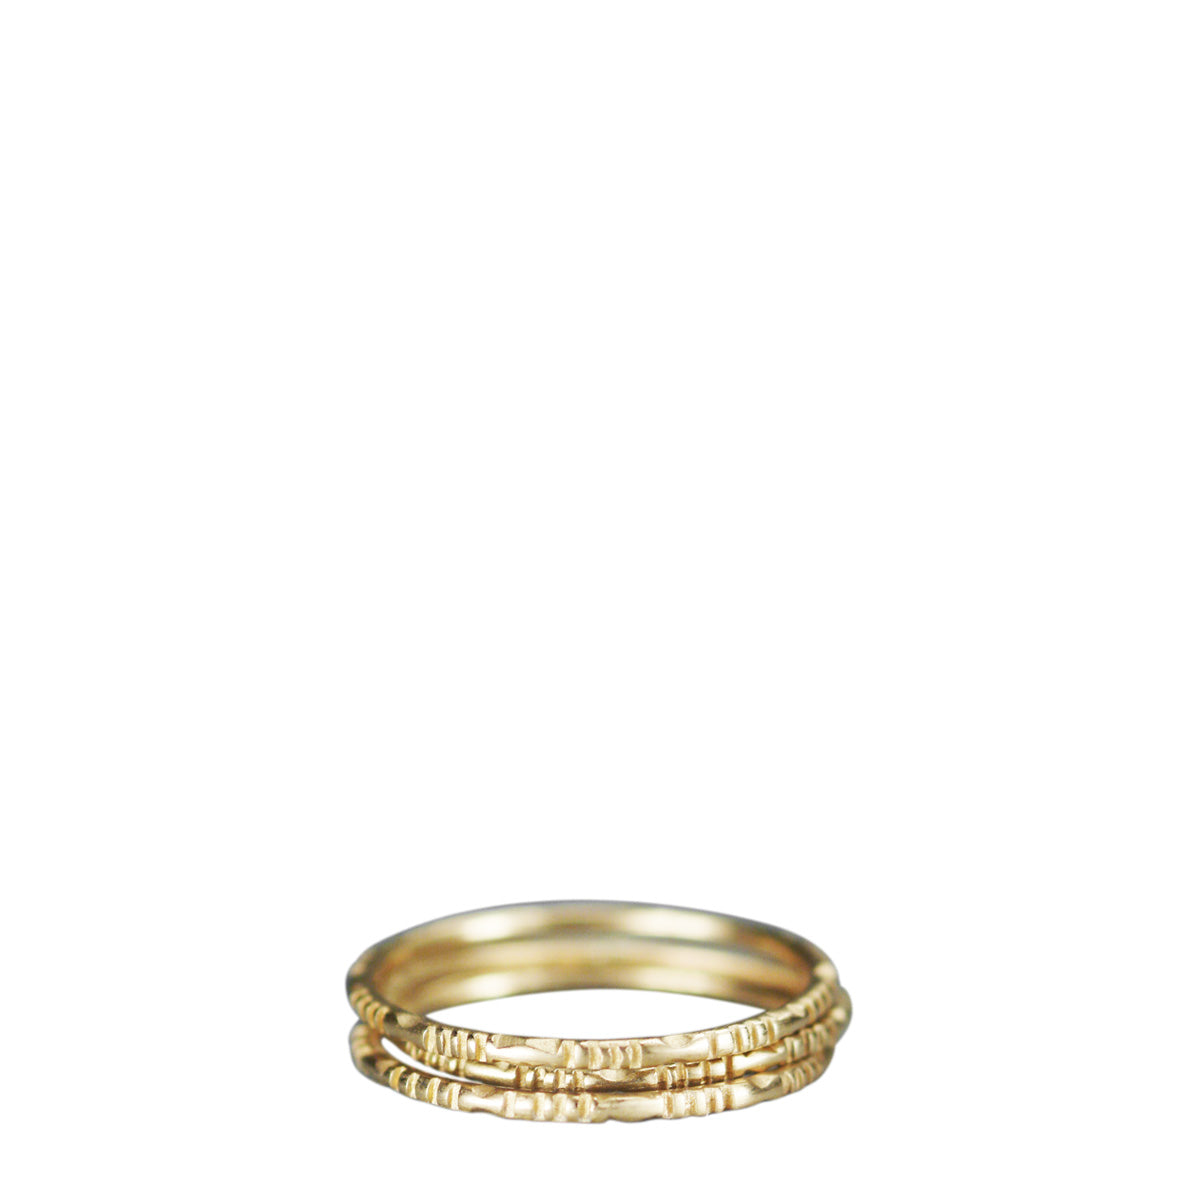 10K Gold Moroccan Rings (Set of Three)